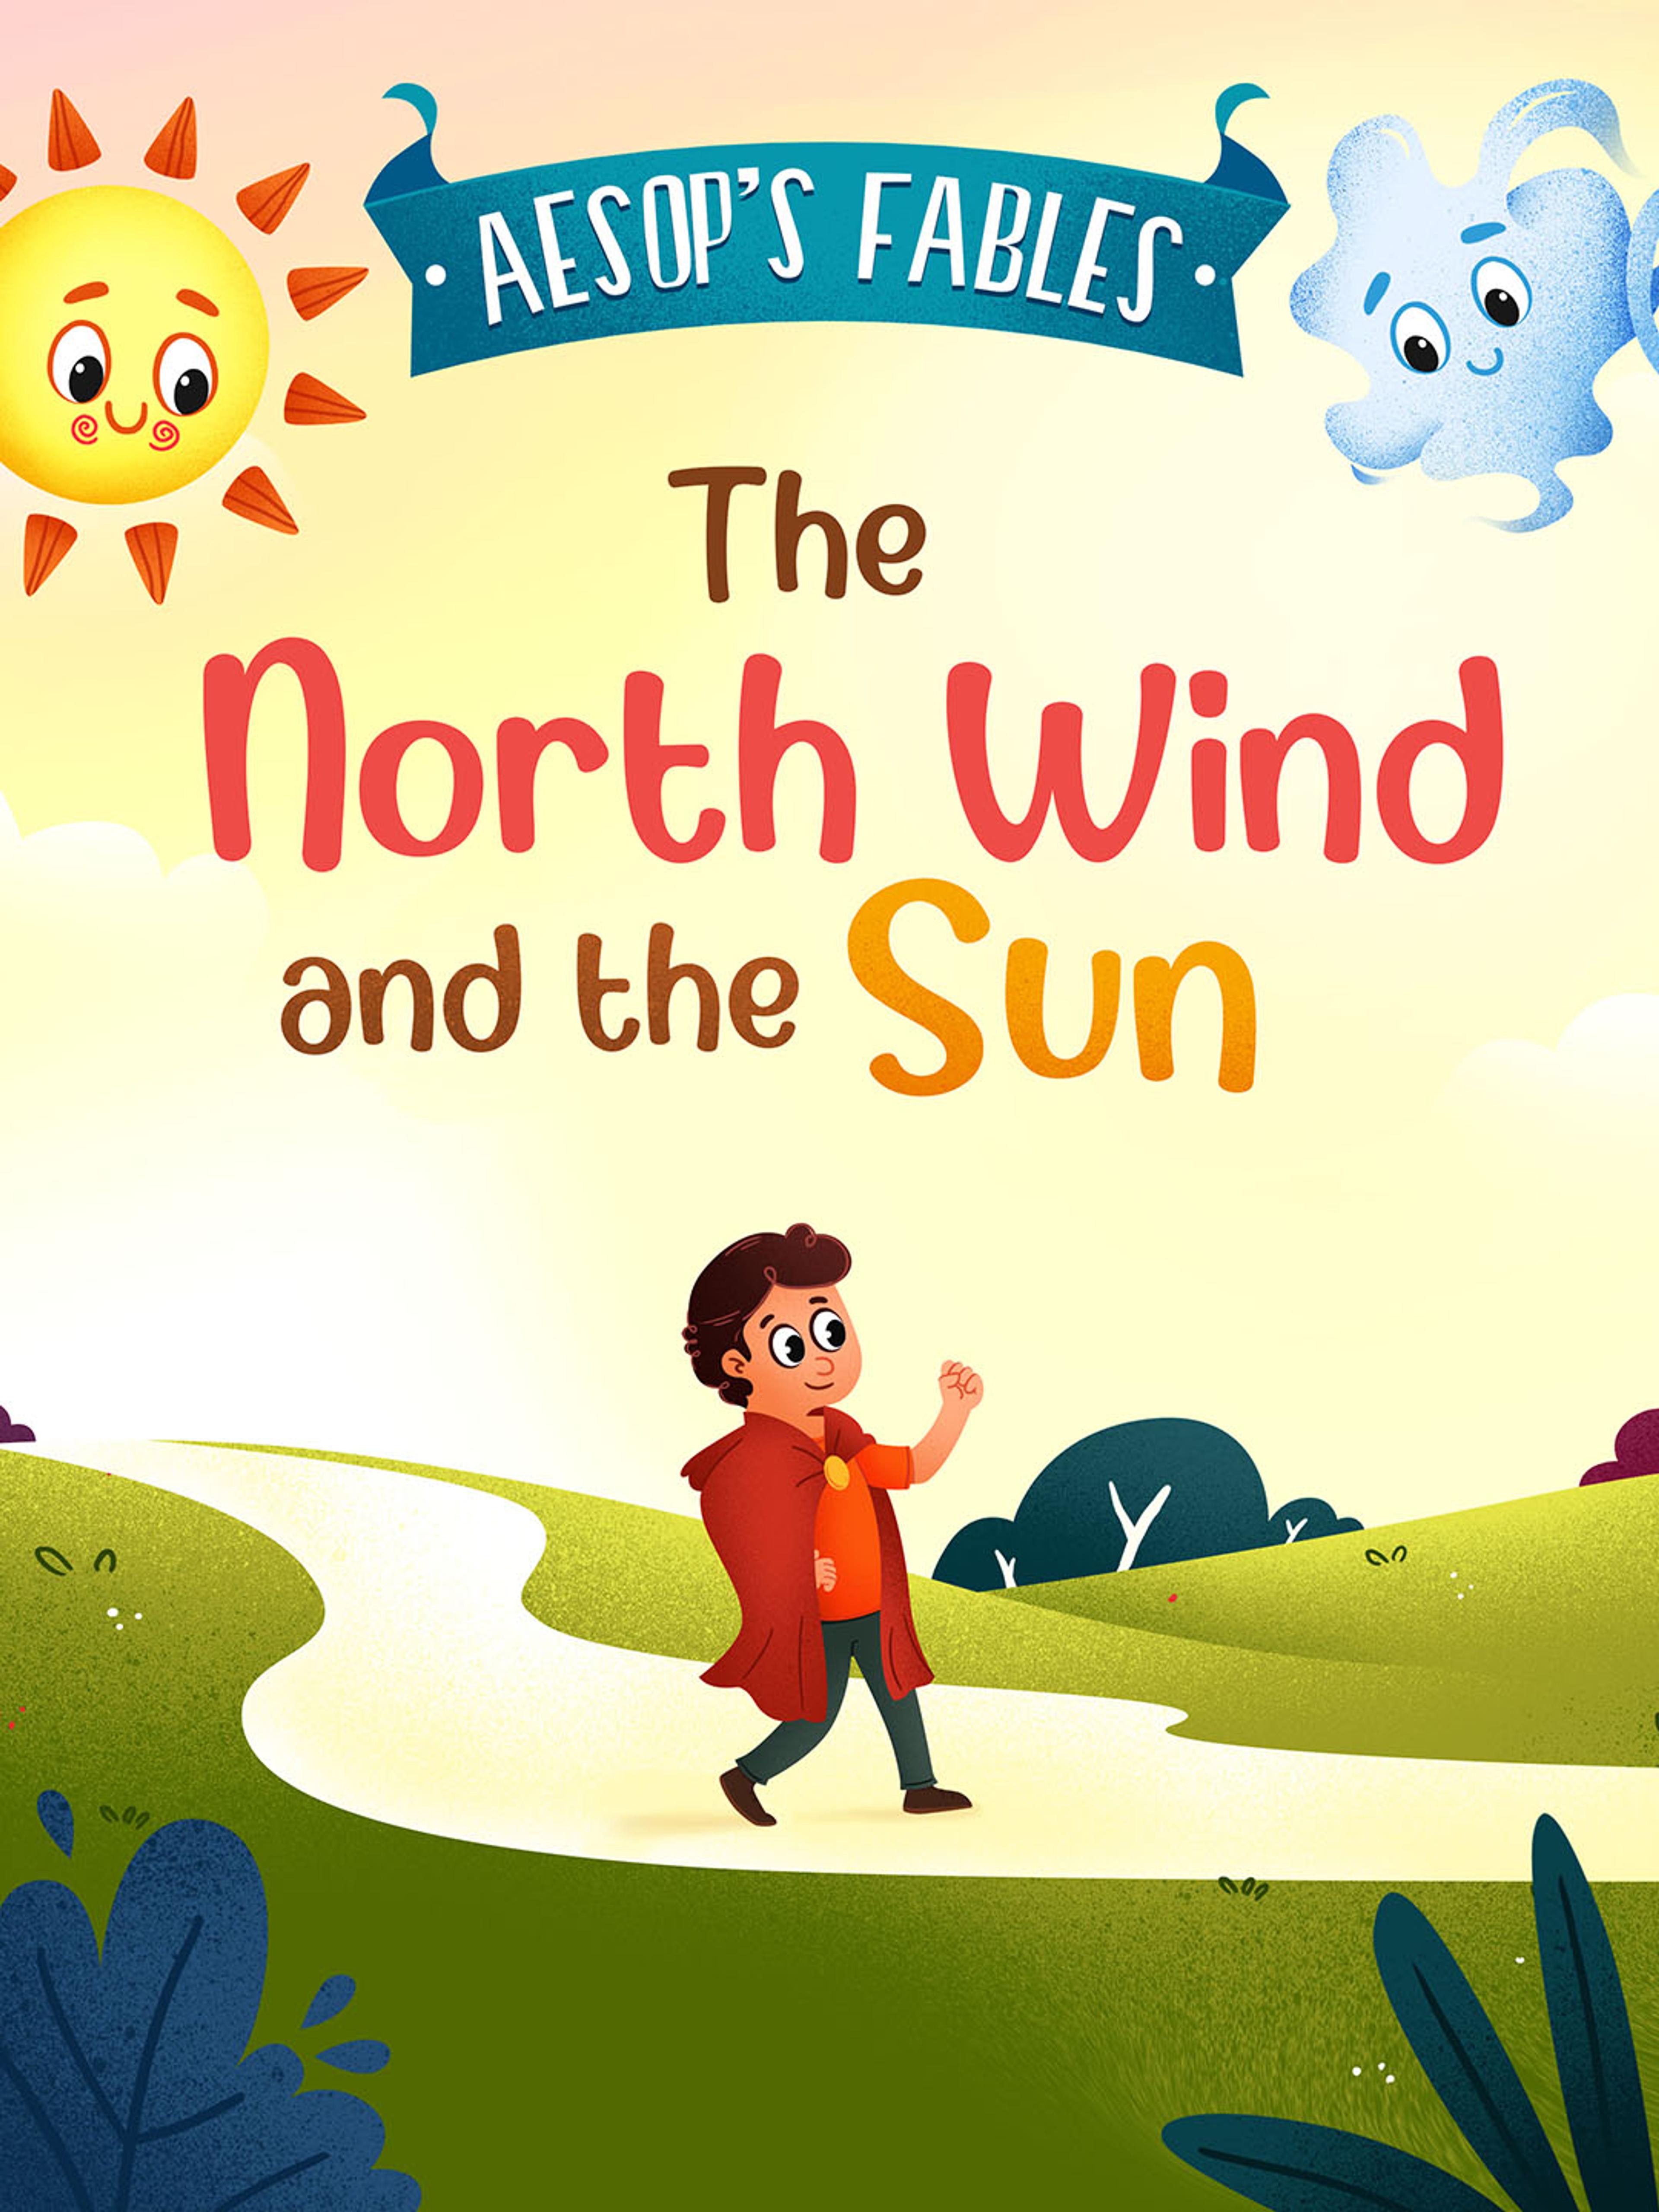 Aesop's Fables: The North Wind and the Sun